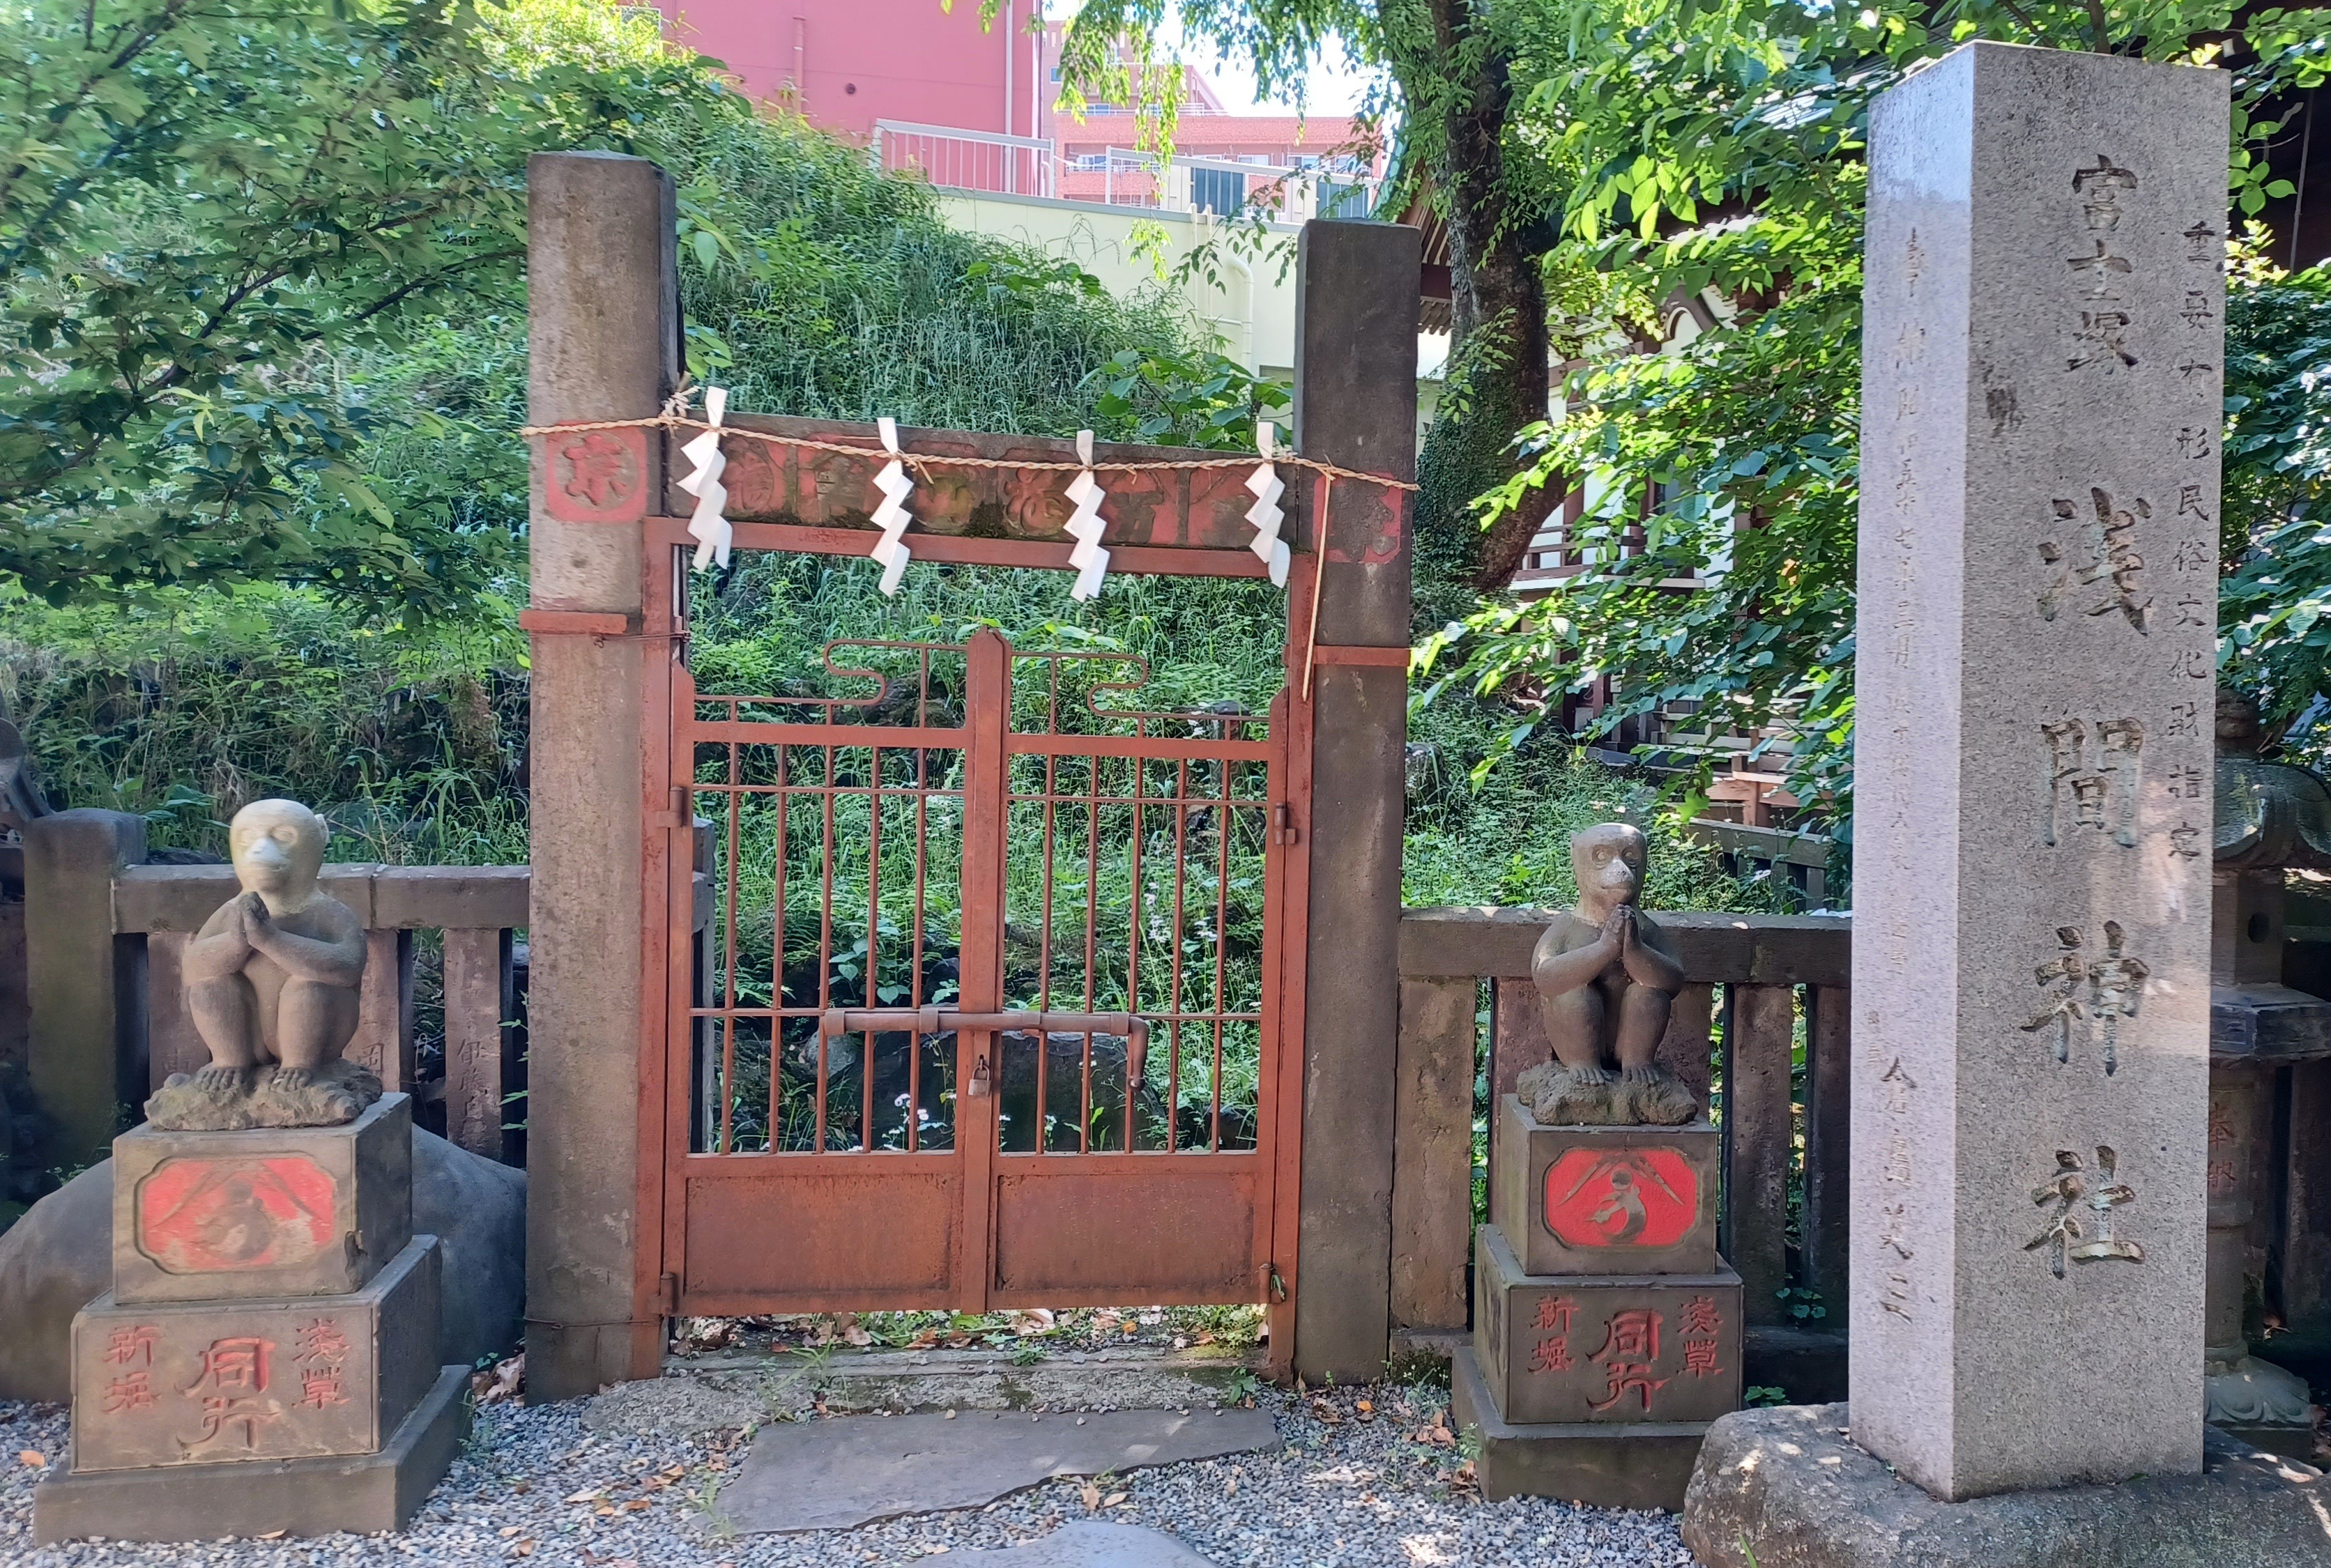 A brown gate with a stone monkey on the left and right side, who are guarding the miniature Mount Fuji. There's a high stone with Japanese symbols next to the monkey on the right side.